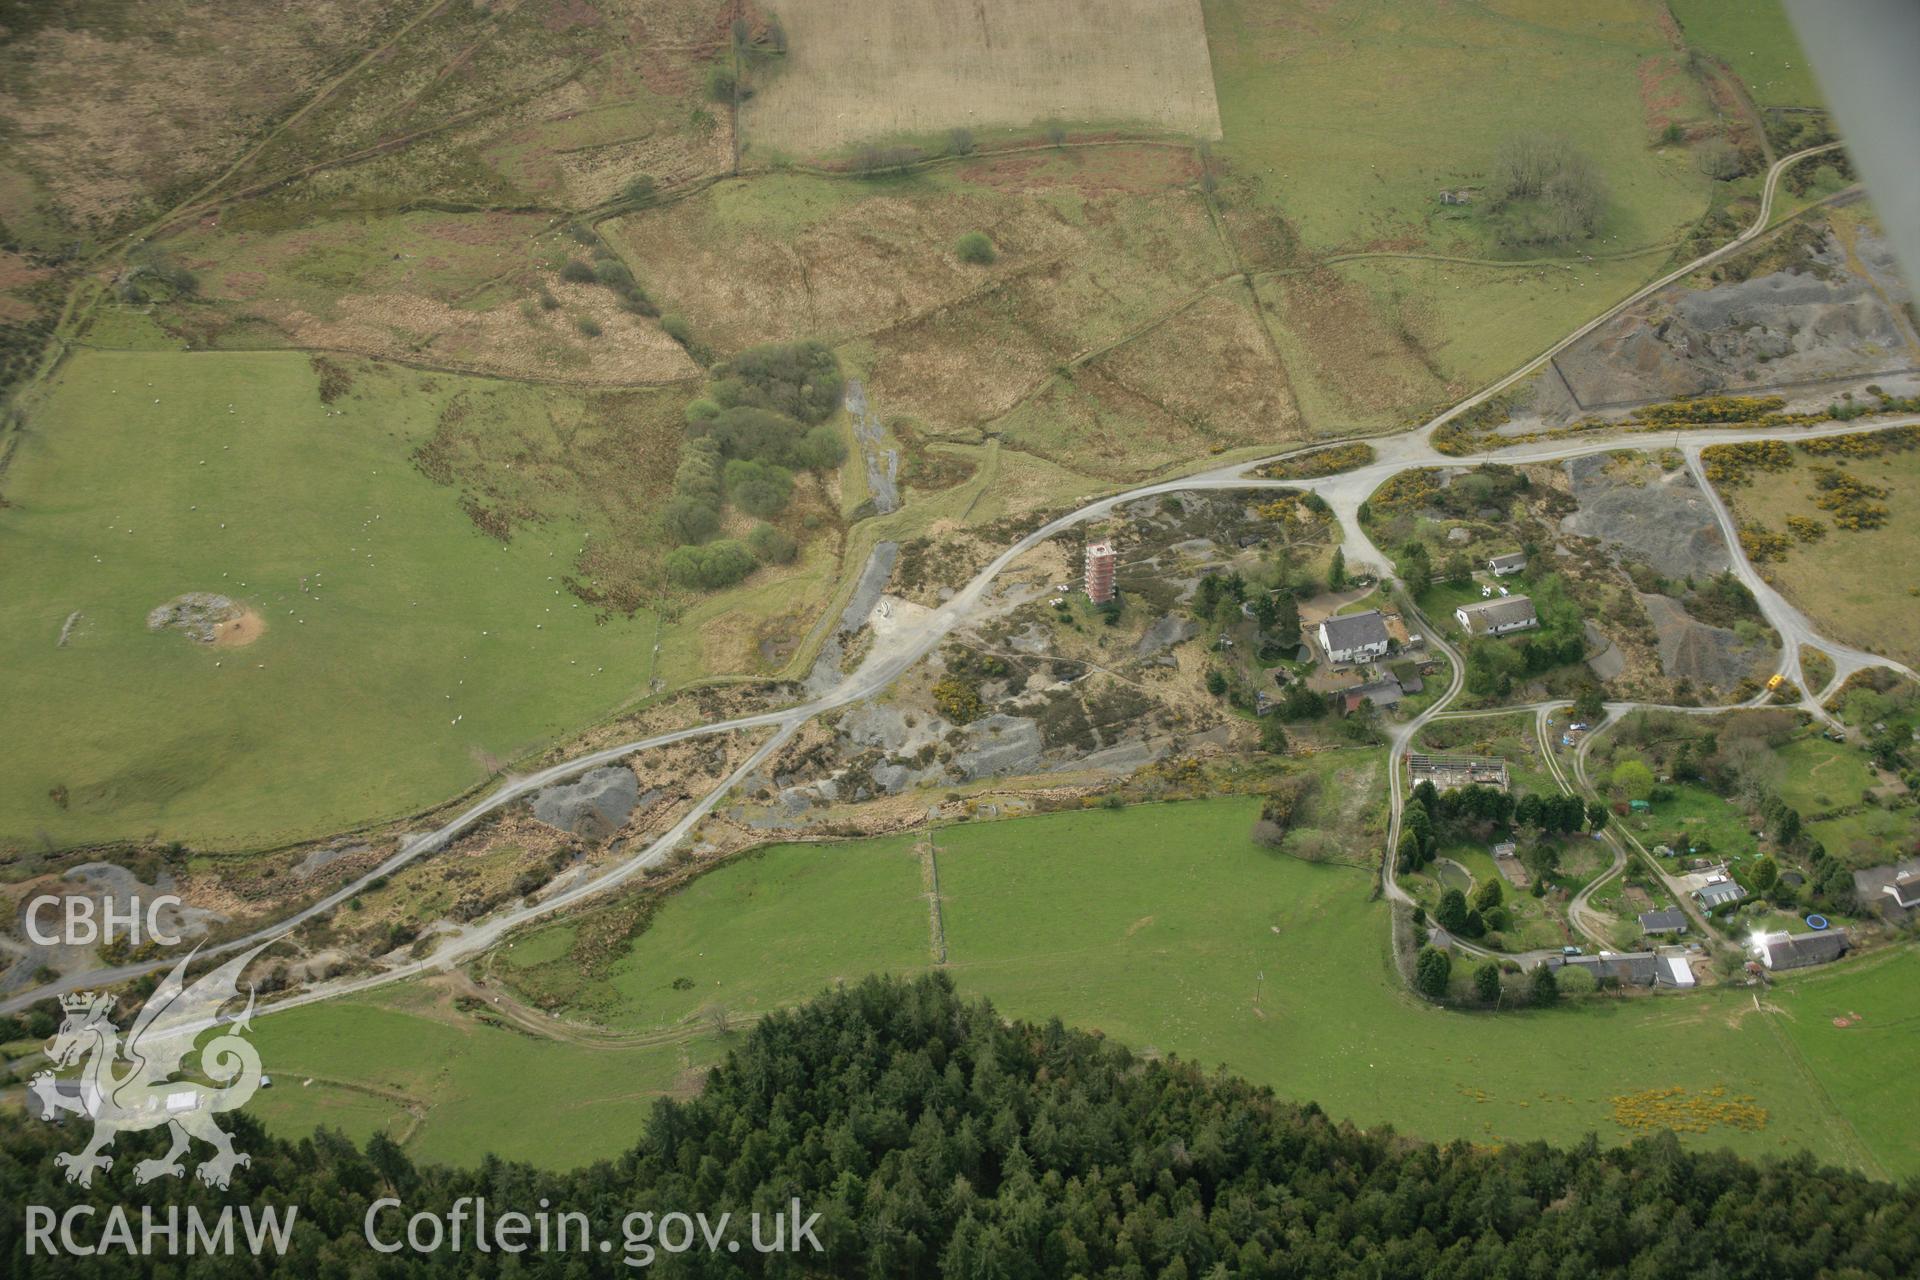 RCAHMW colour oblique aerial photograph of Cwmsymlog Lead Mine. Taken on 17 April 2007 by Toby Driver